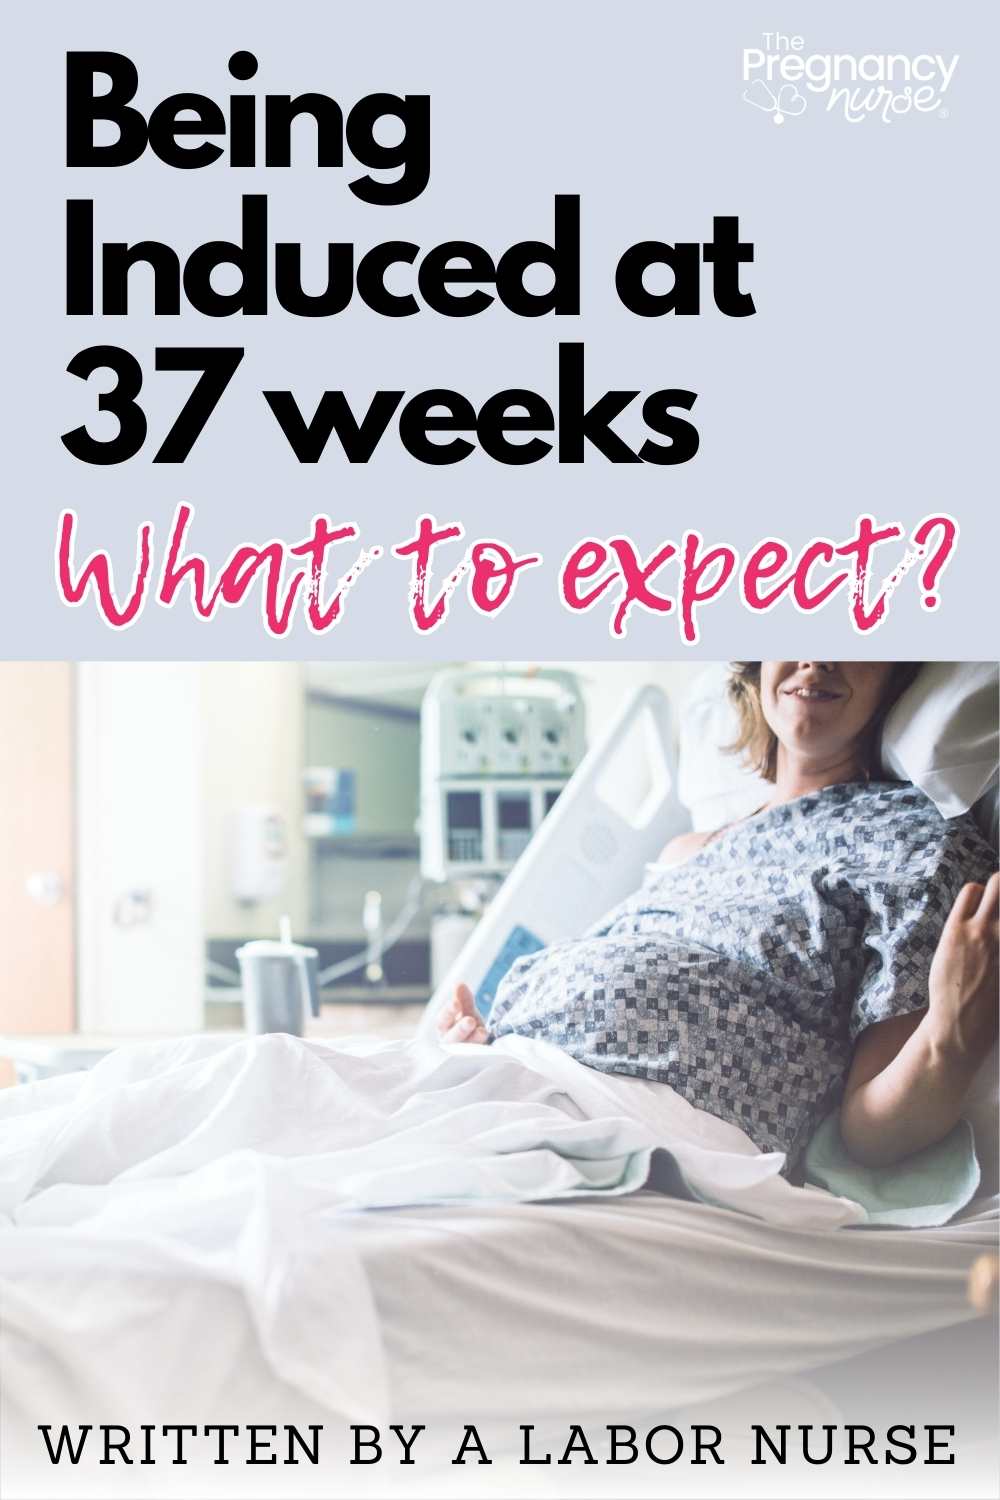 Are you about to be induced at 37 weeks? Feeling anxious about what to expect? Don't worry, Mama. Let us walk you through this journey to meet your precious bundle of joy with our comprehensive 37 weeks induction survival guide.